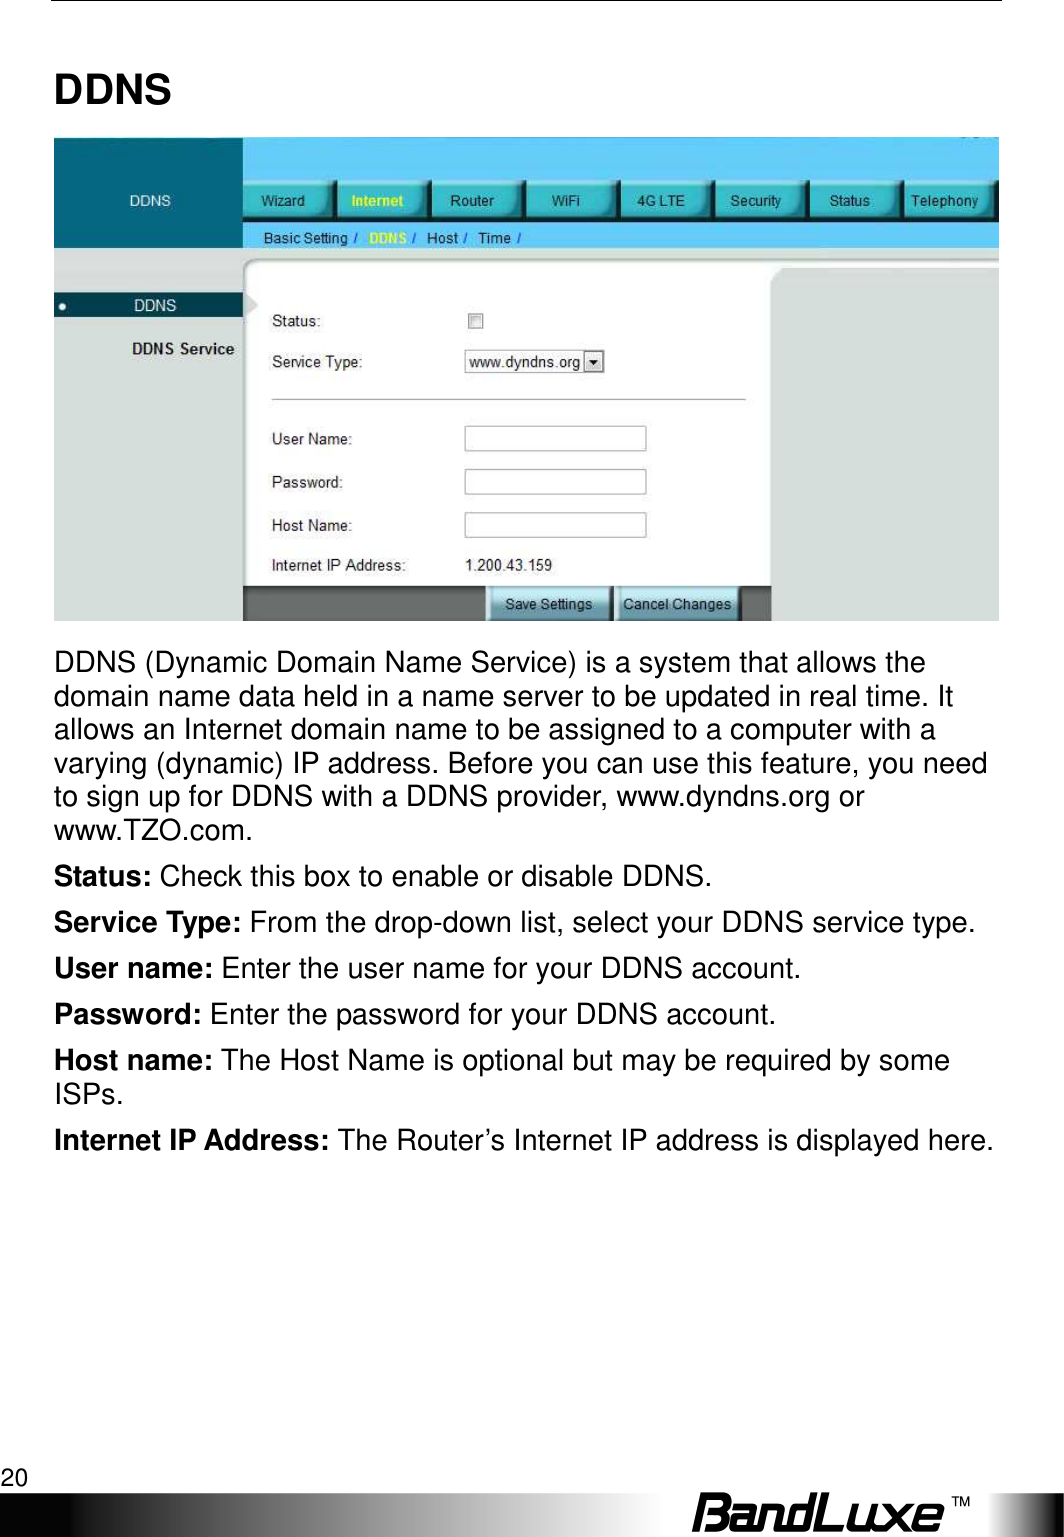 Internet Setup 20  DDNS  DDNS (Dynamic Domain Name Service) is a system that allows the domain name data held in a name server to be updated in real time. It allows an Internet domain name to be assigned to a computer with a varying (dynamic) IP address. Before you can use this feature, you need to sign up for DDNS with a DDNS provider, www.dyndns.org or www.TZO.com. Status: Check this box to enable or disable DDNS. Service Type: From the drop-down list, select your DDNS service type. User name: Enter the user name for your DDNS account. Password: Enter the password for your DDNS account. Host name: The Host Name is optional but may be required by some ISPs. Internet IP Address: The Router’s Internet IP address is displayed here.   